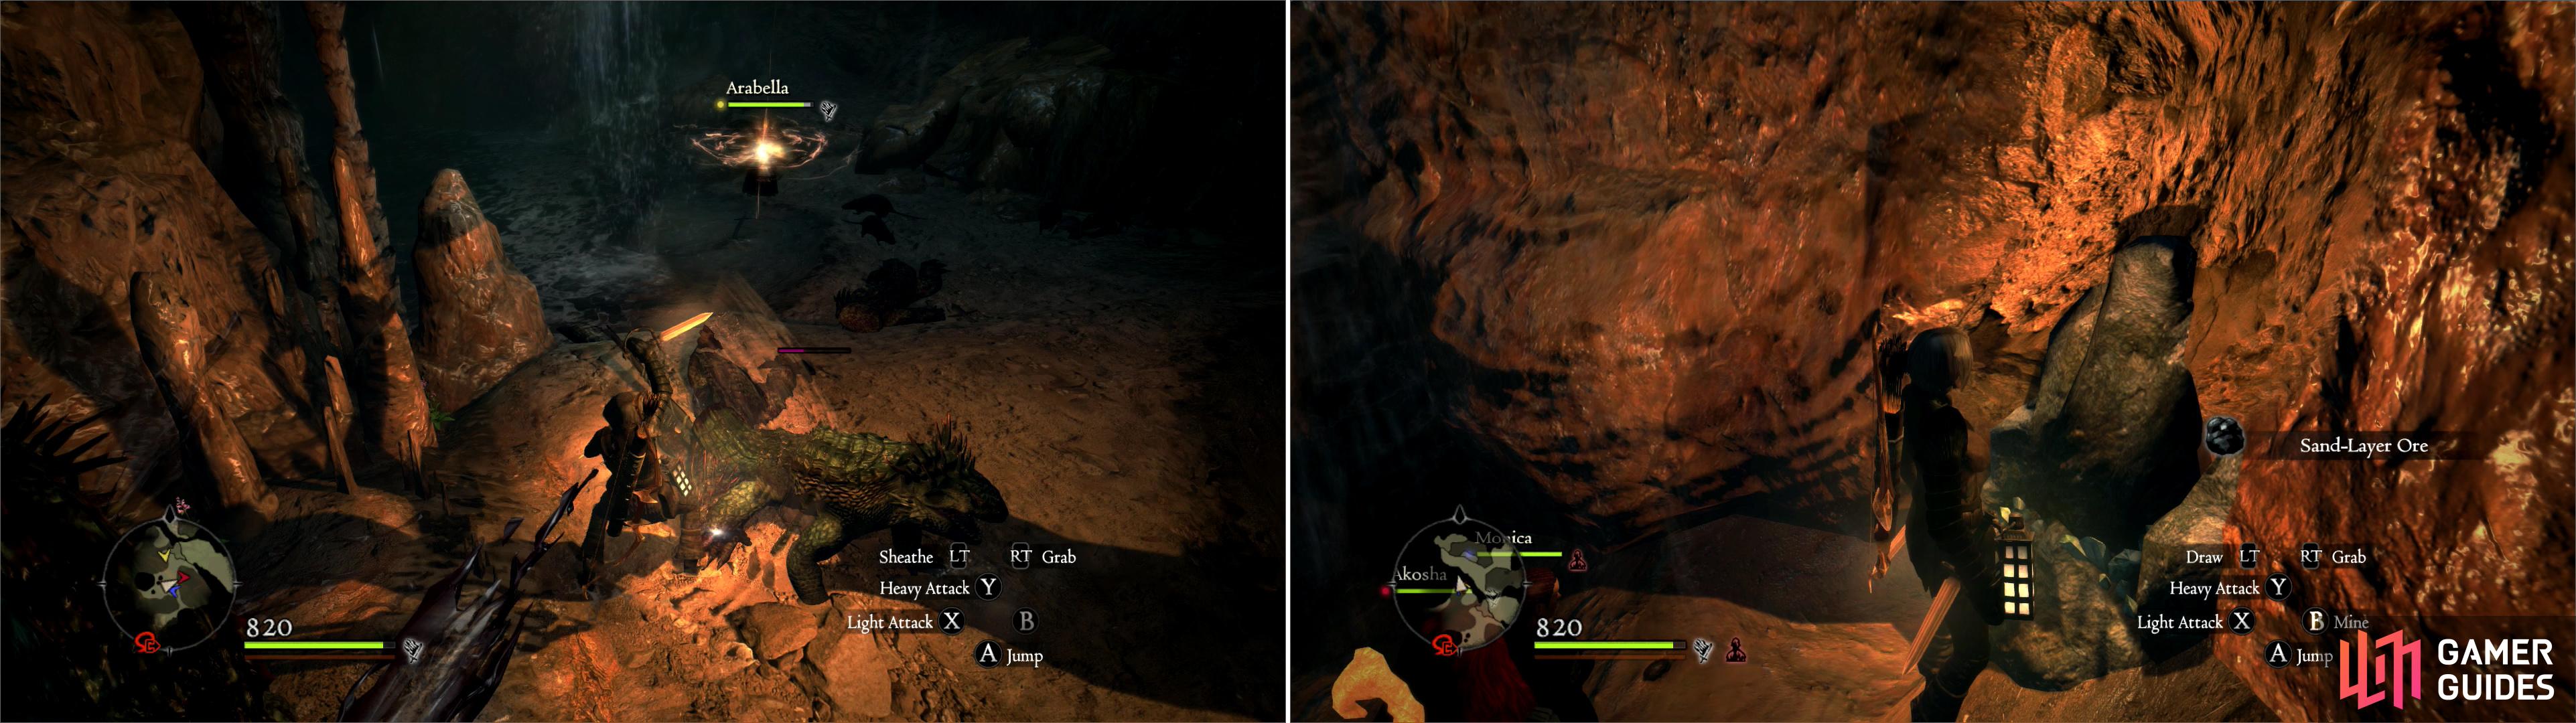 Hack apart the Saurians dwelling in the caves under Cassardis (left). While down here, mine the ore veins to obtain some rare Sand-Layer Ore (right).